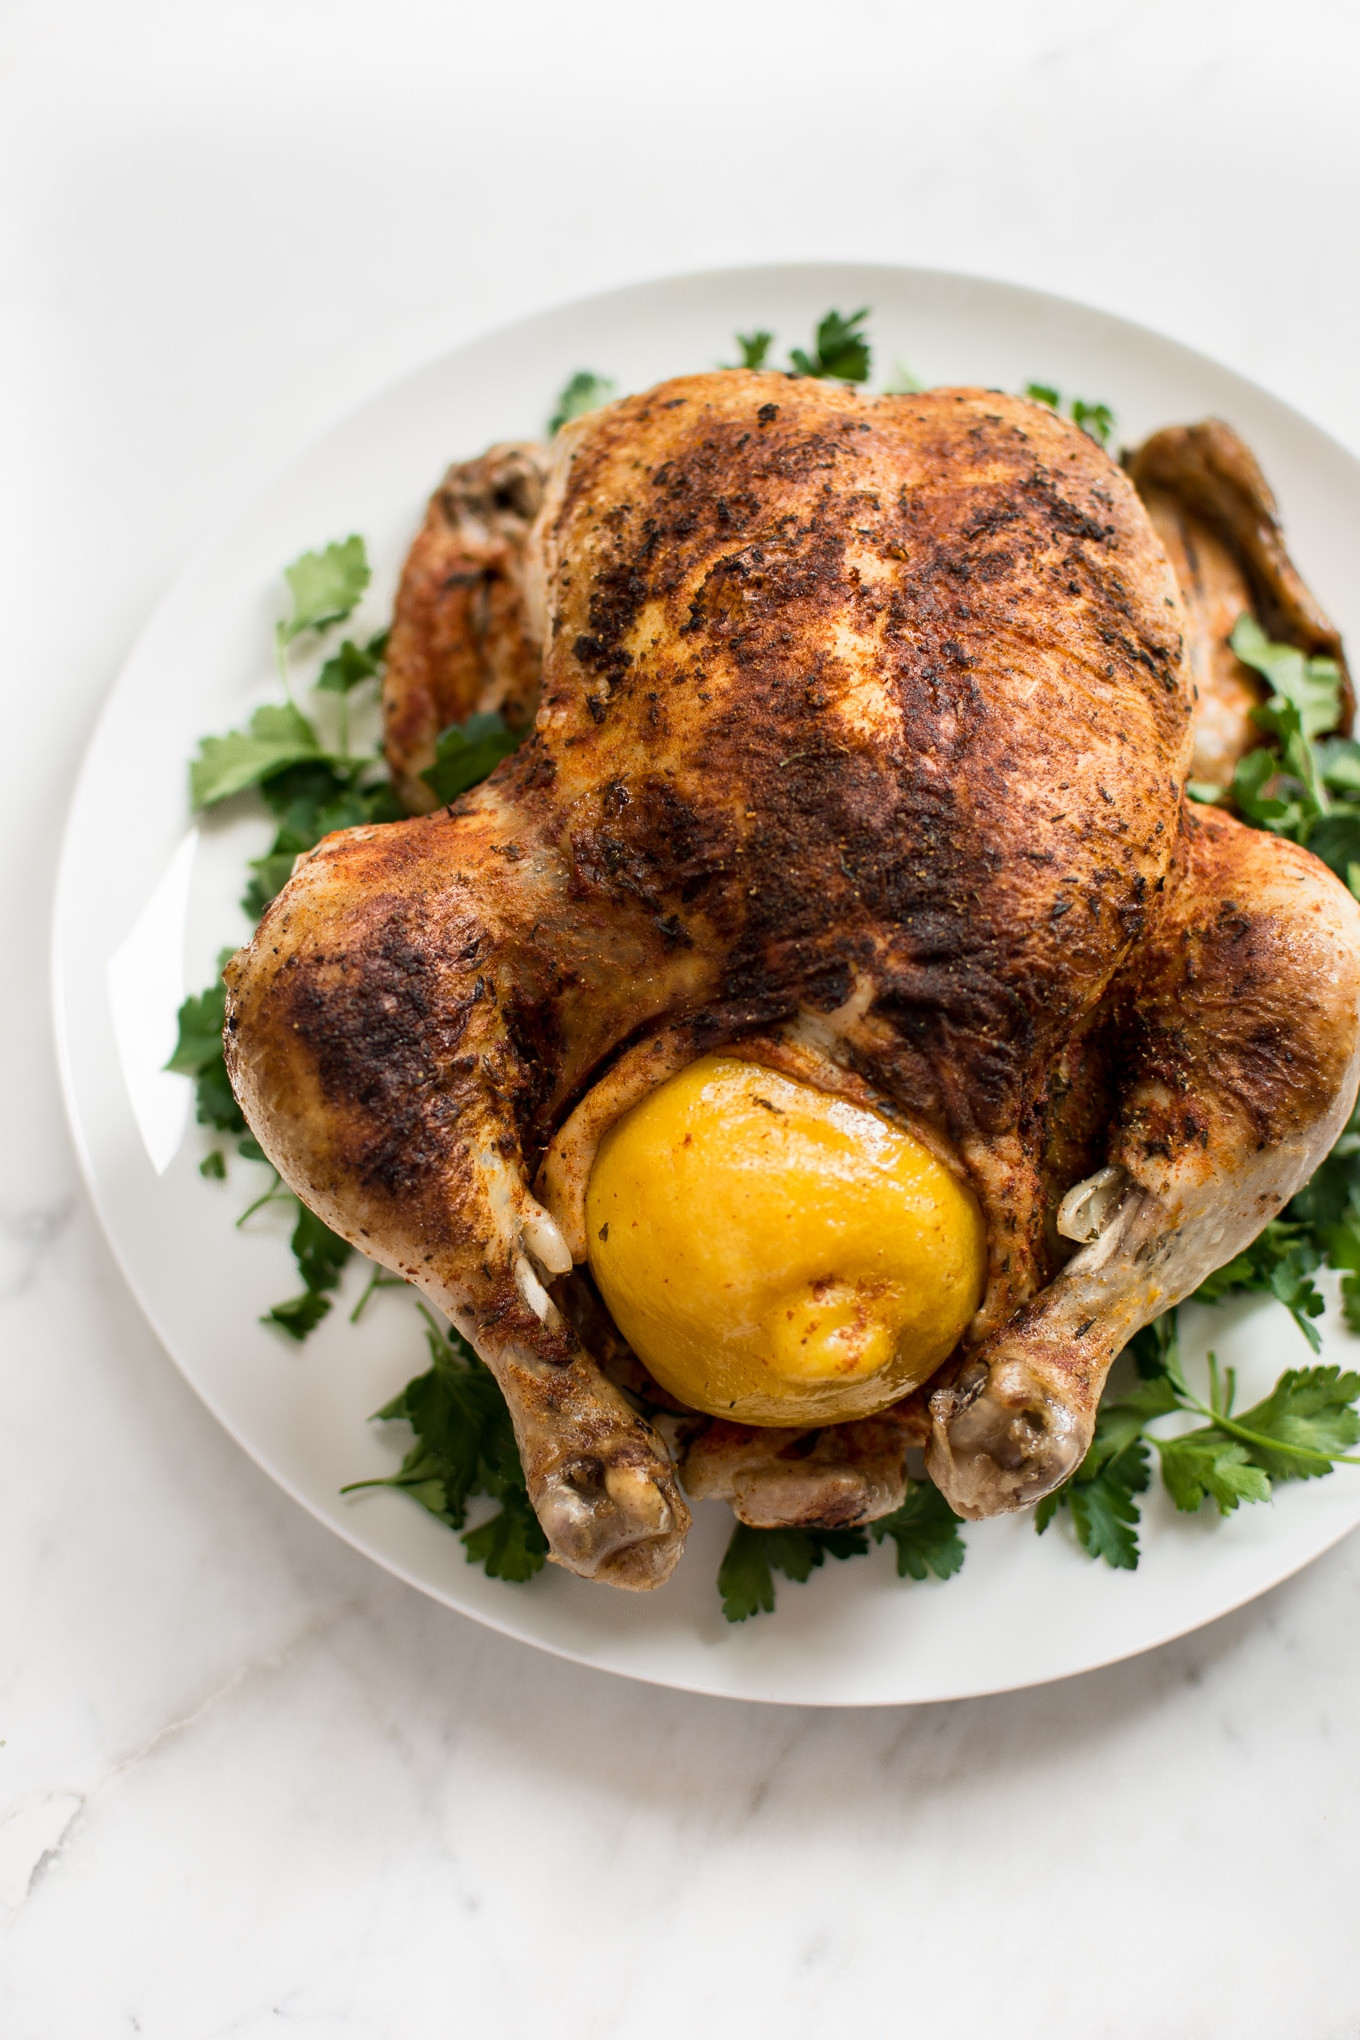 Cooking A Whole Chicken In The Instant Pot
 Instant Pot Whole Chicken • Salt & Lavender